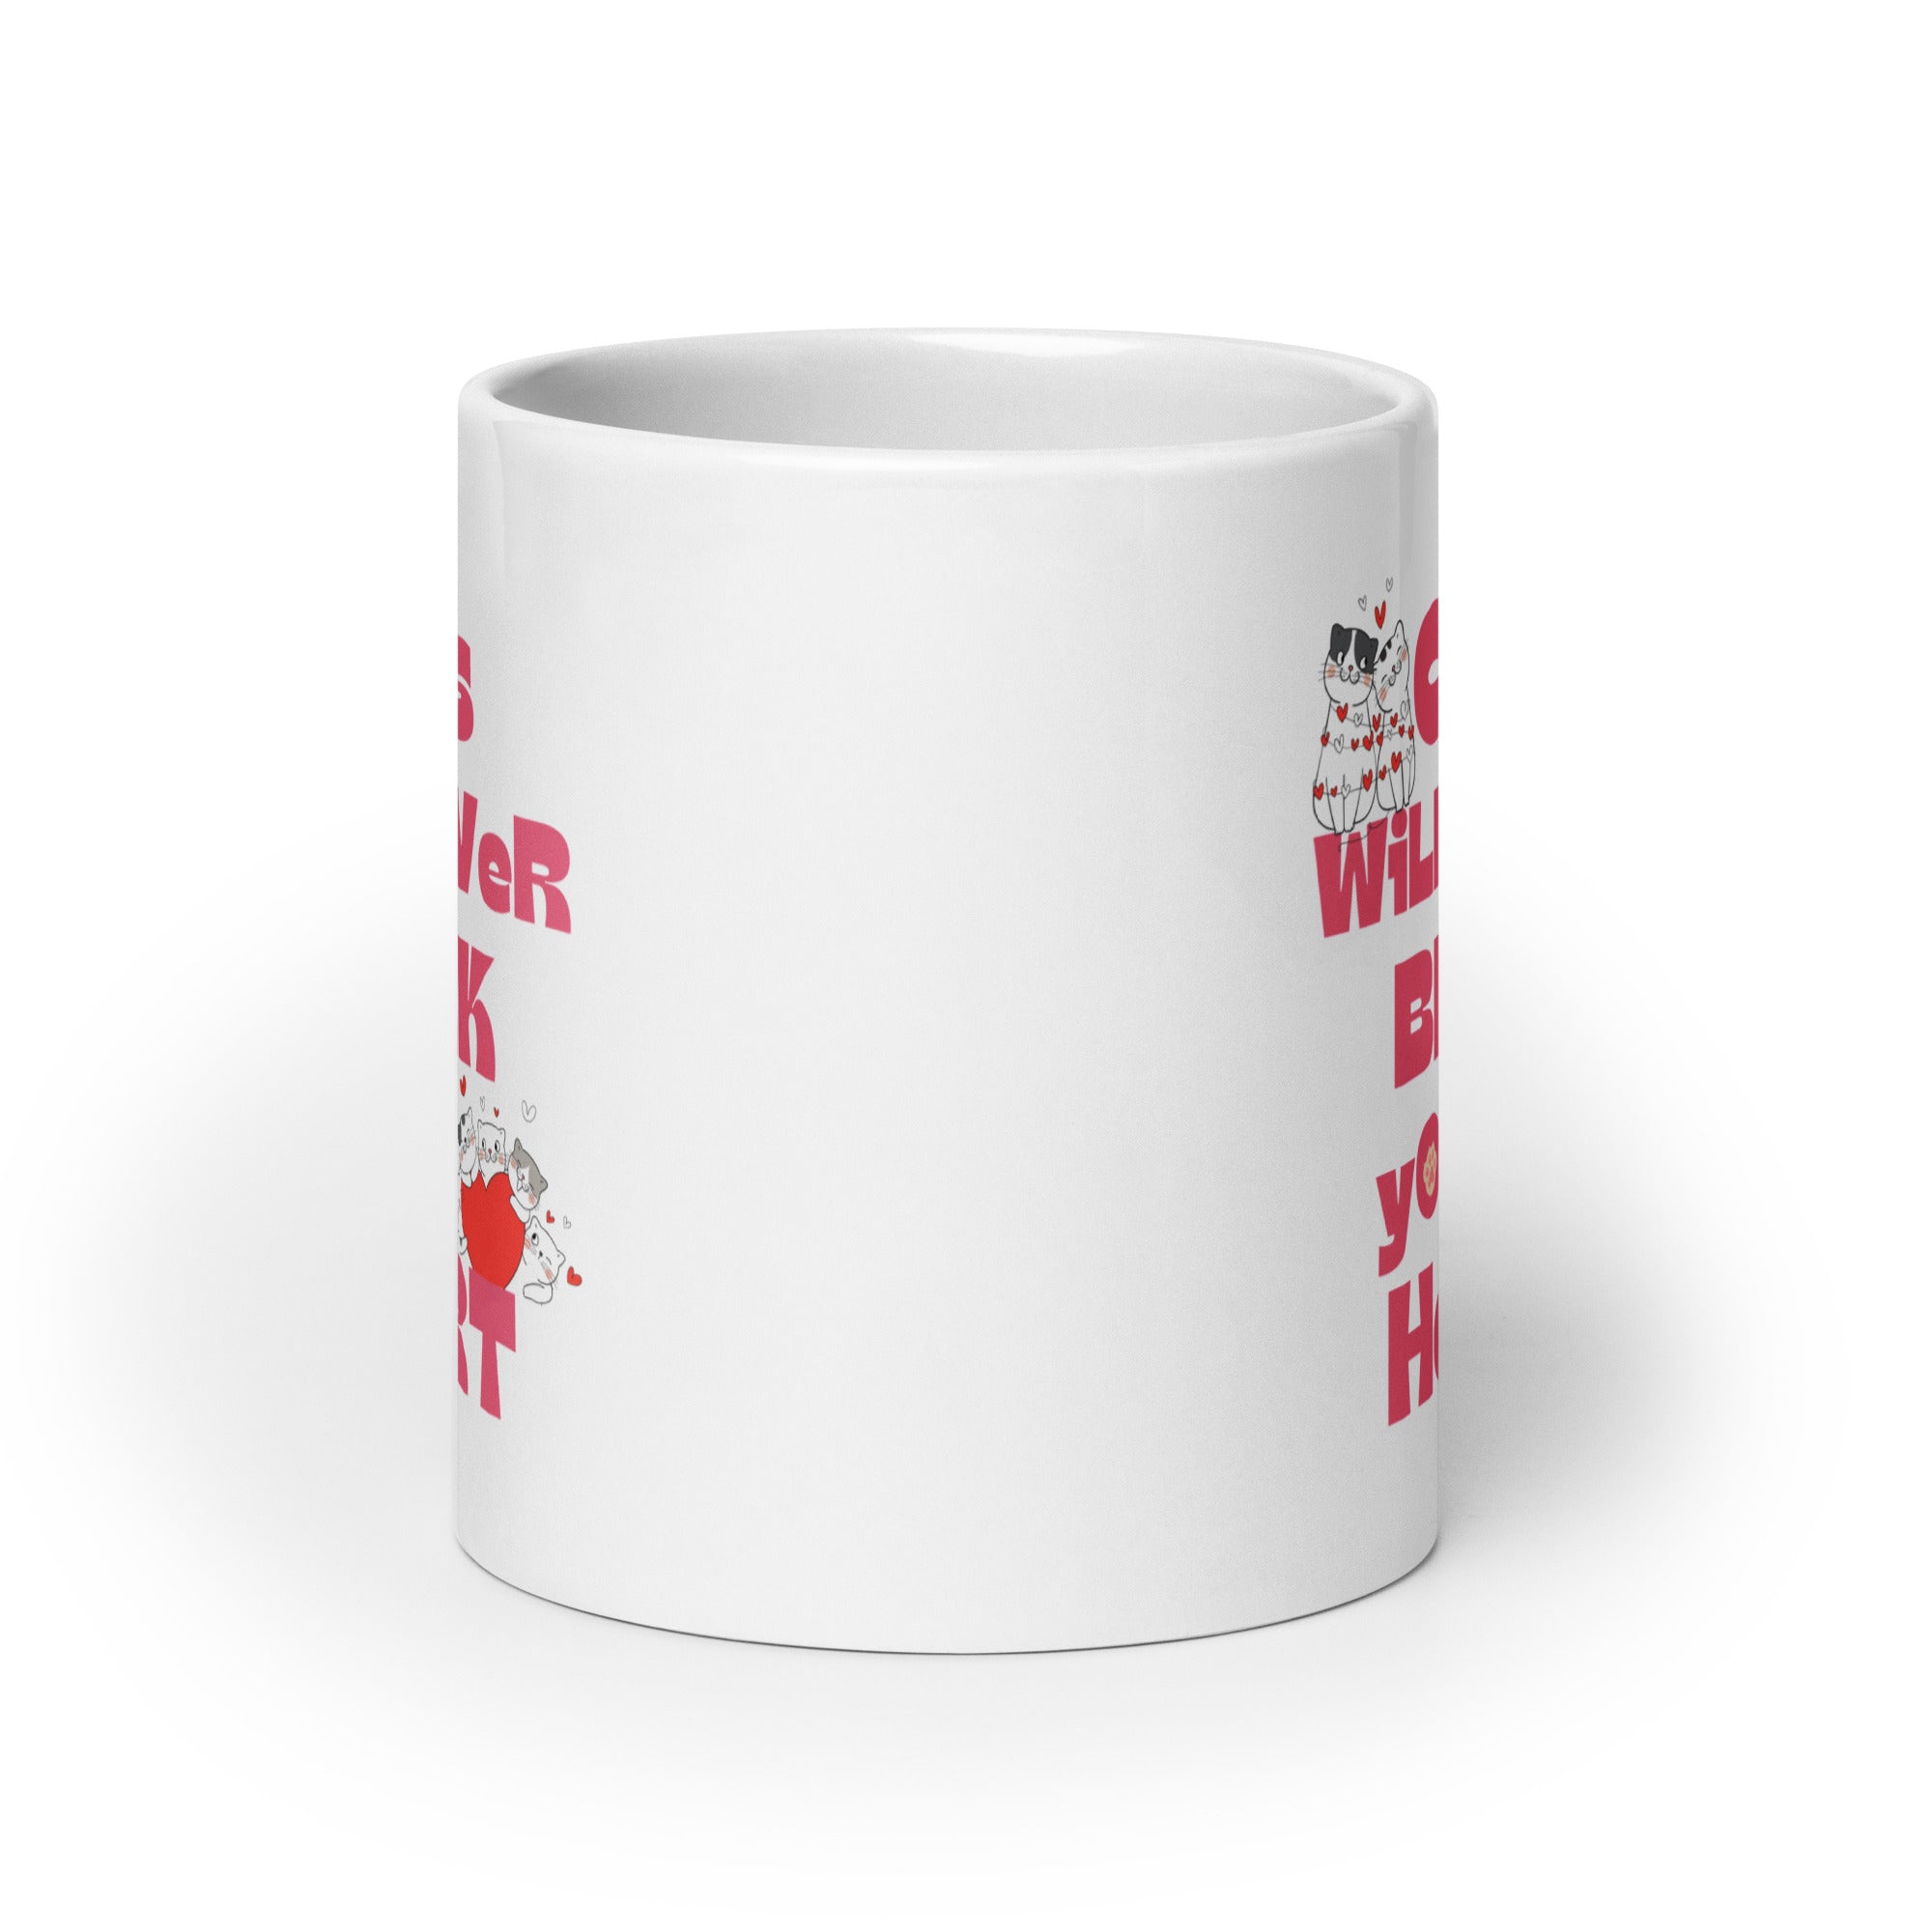 Shop Cats Will Never Break Your Heart Valentine's Coffee Mug Cup, Mugs, USA Boutique